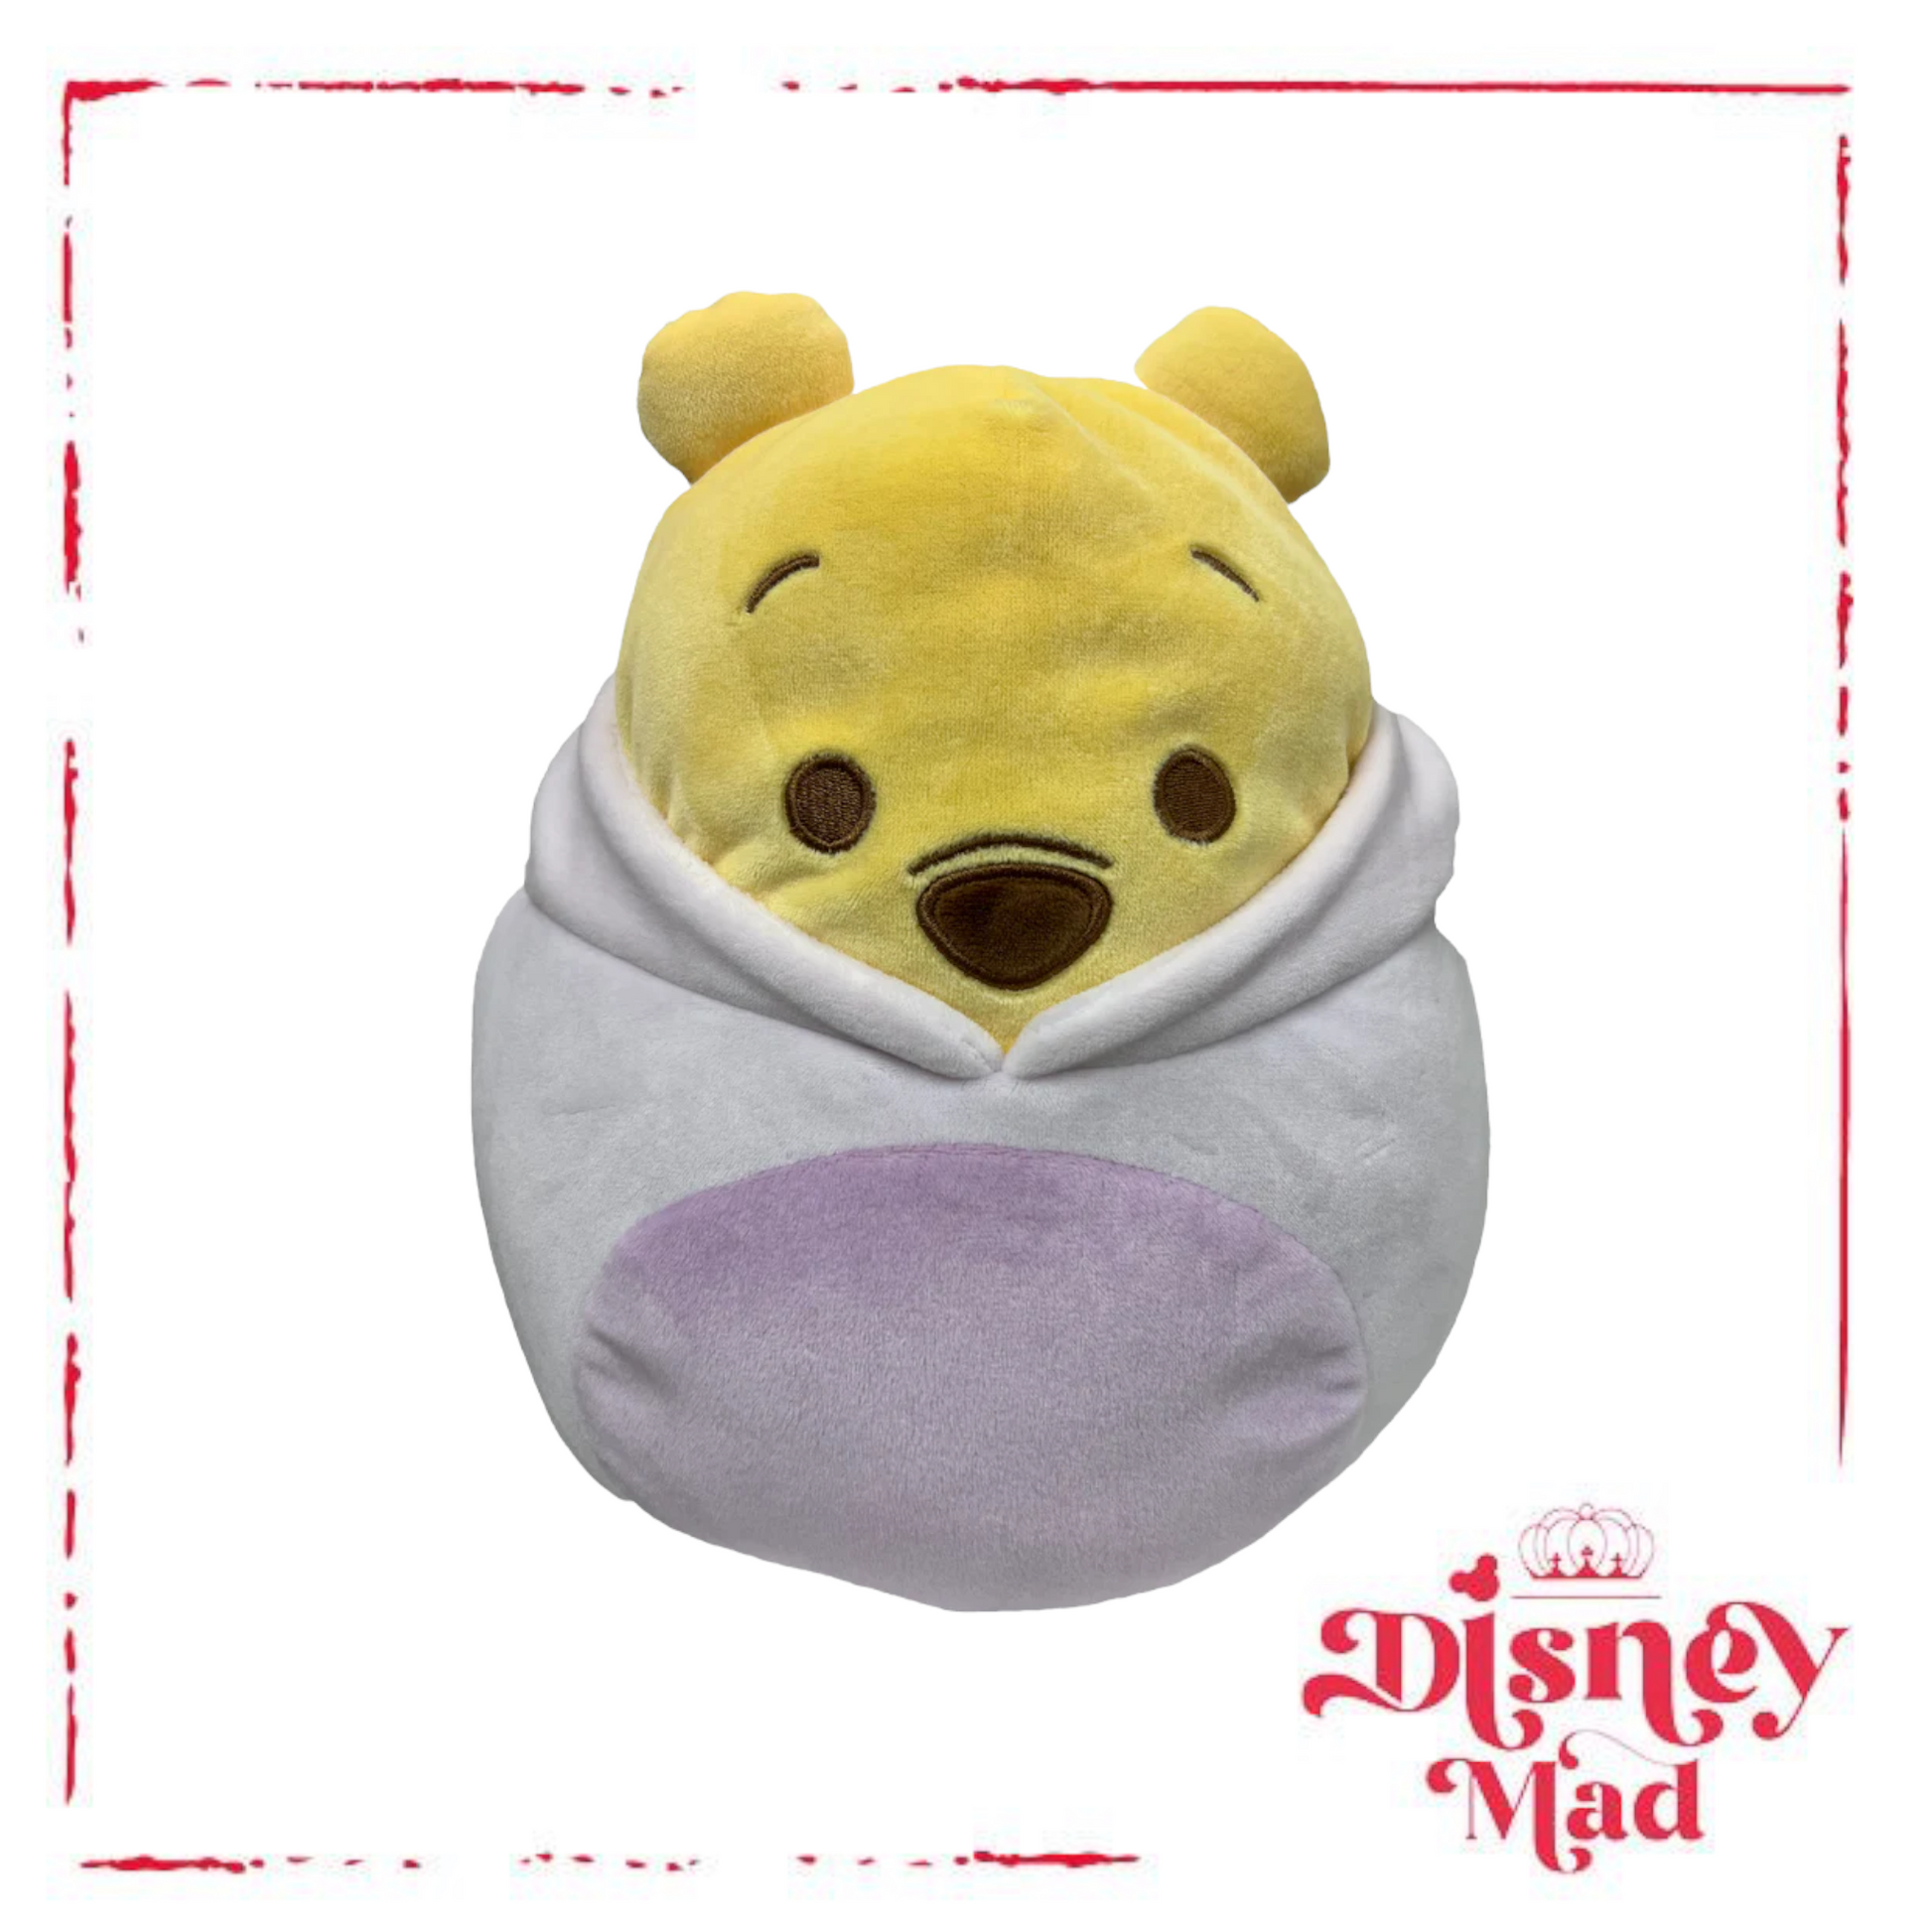 Are These Disney's Take on Squishmallows?!